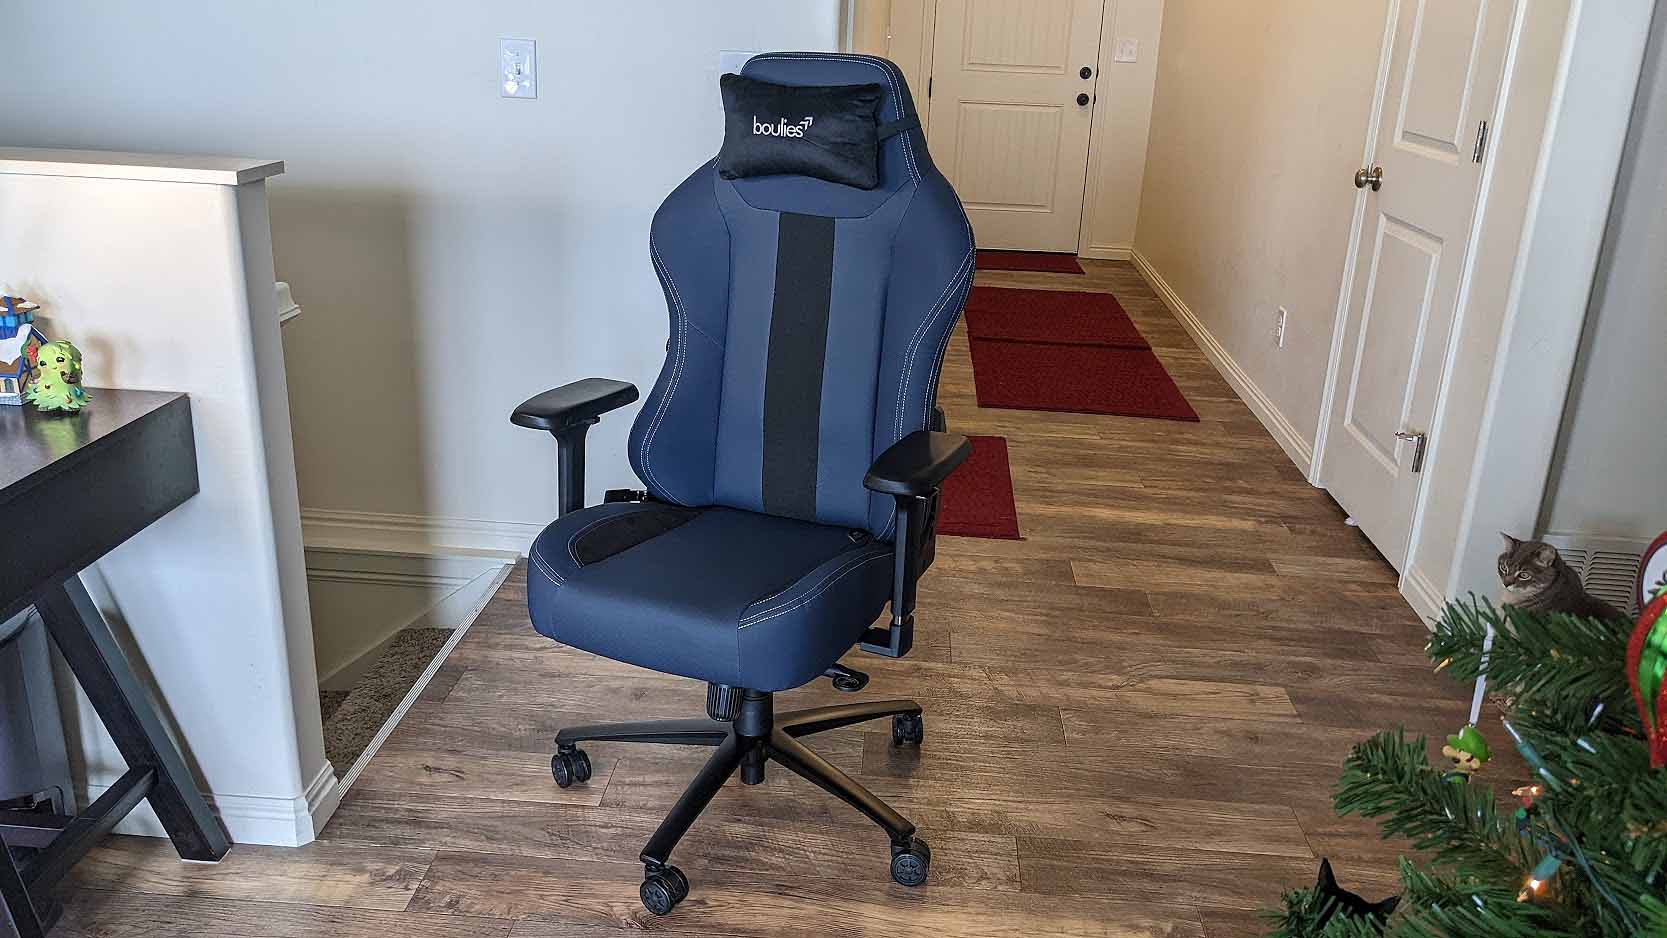 Boulies Master Series gaming chair in living room